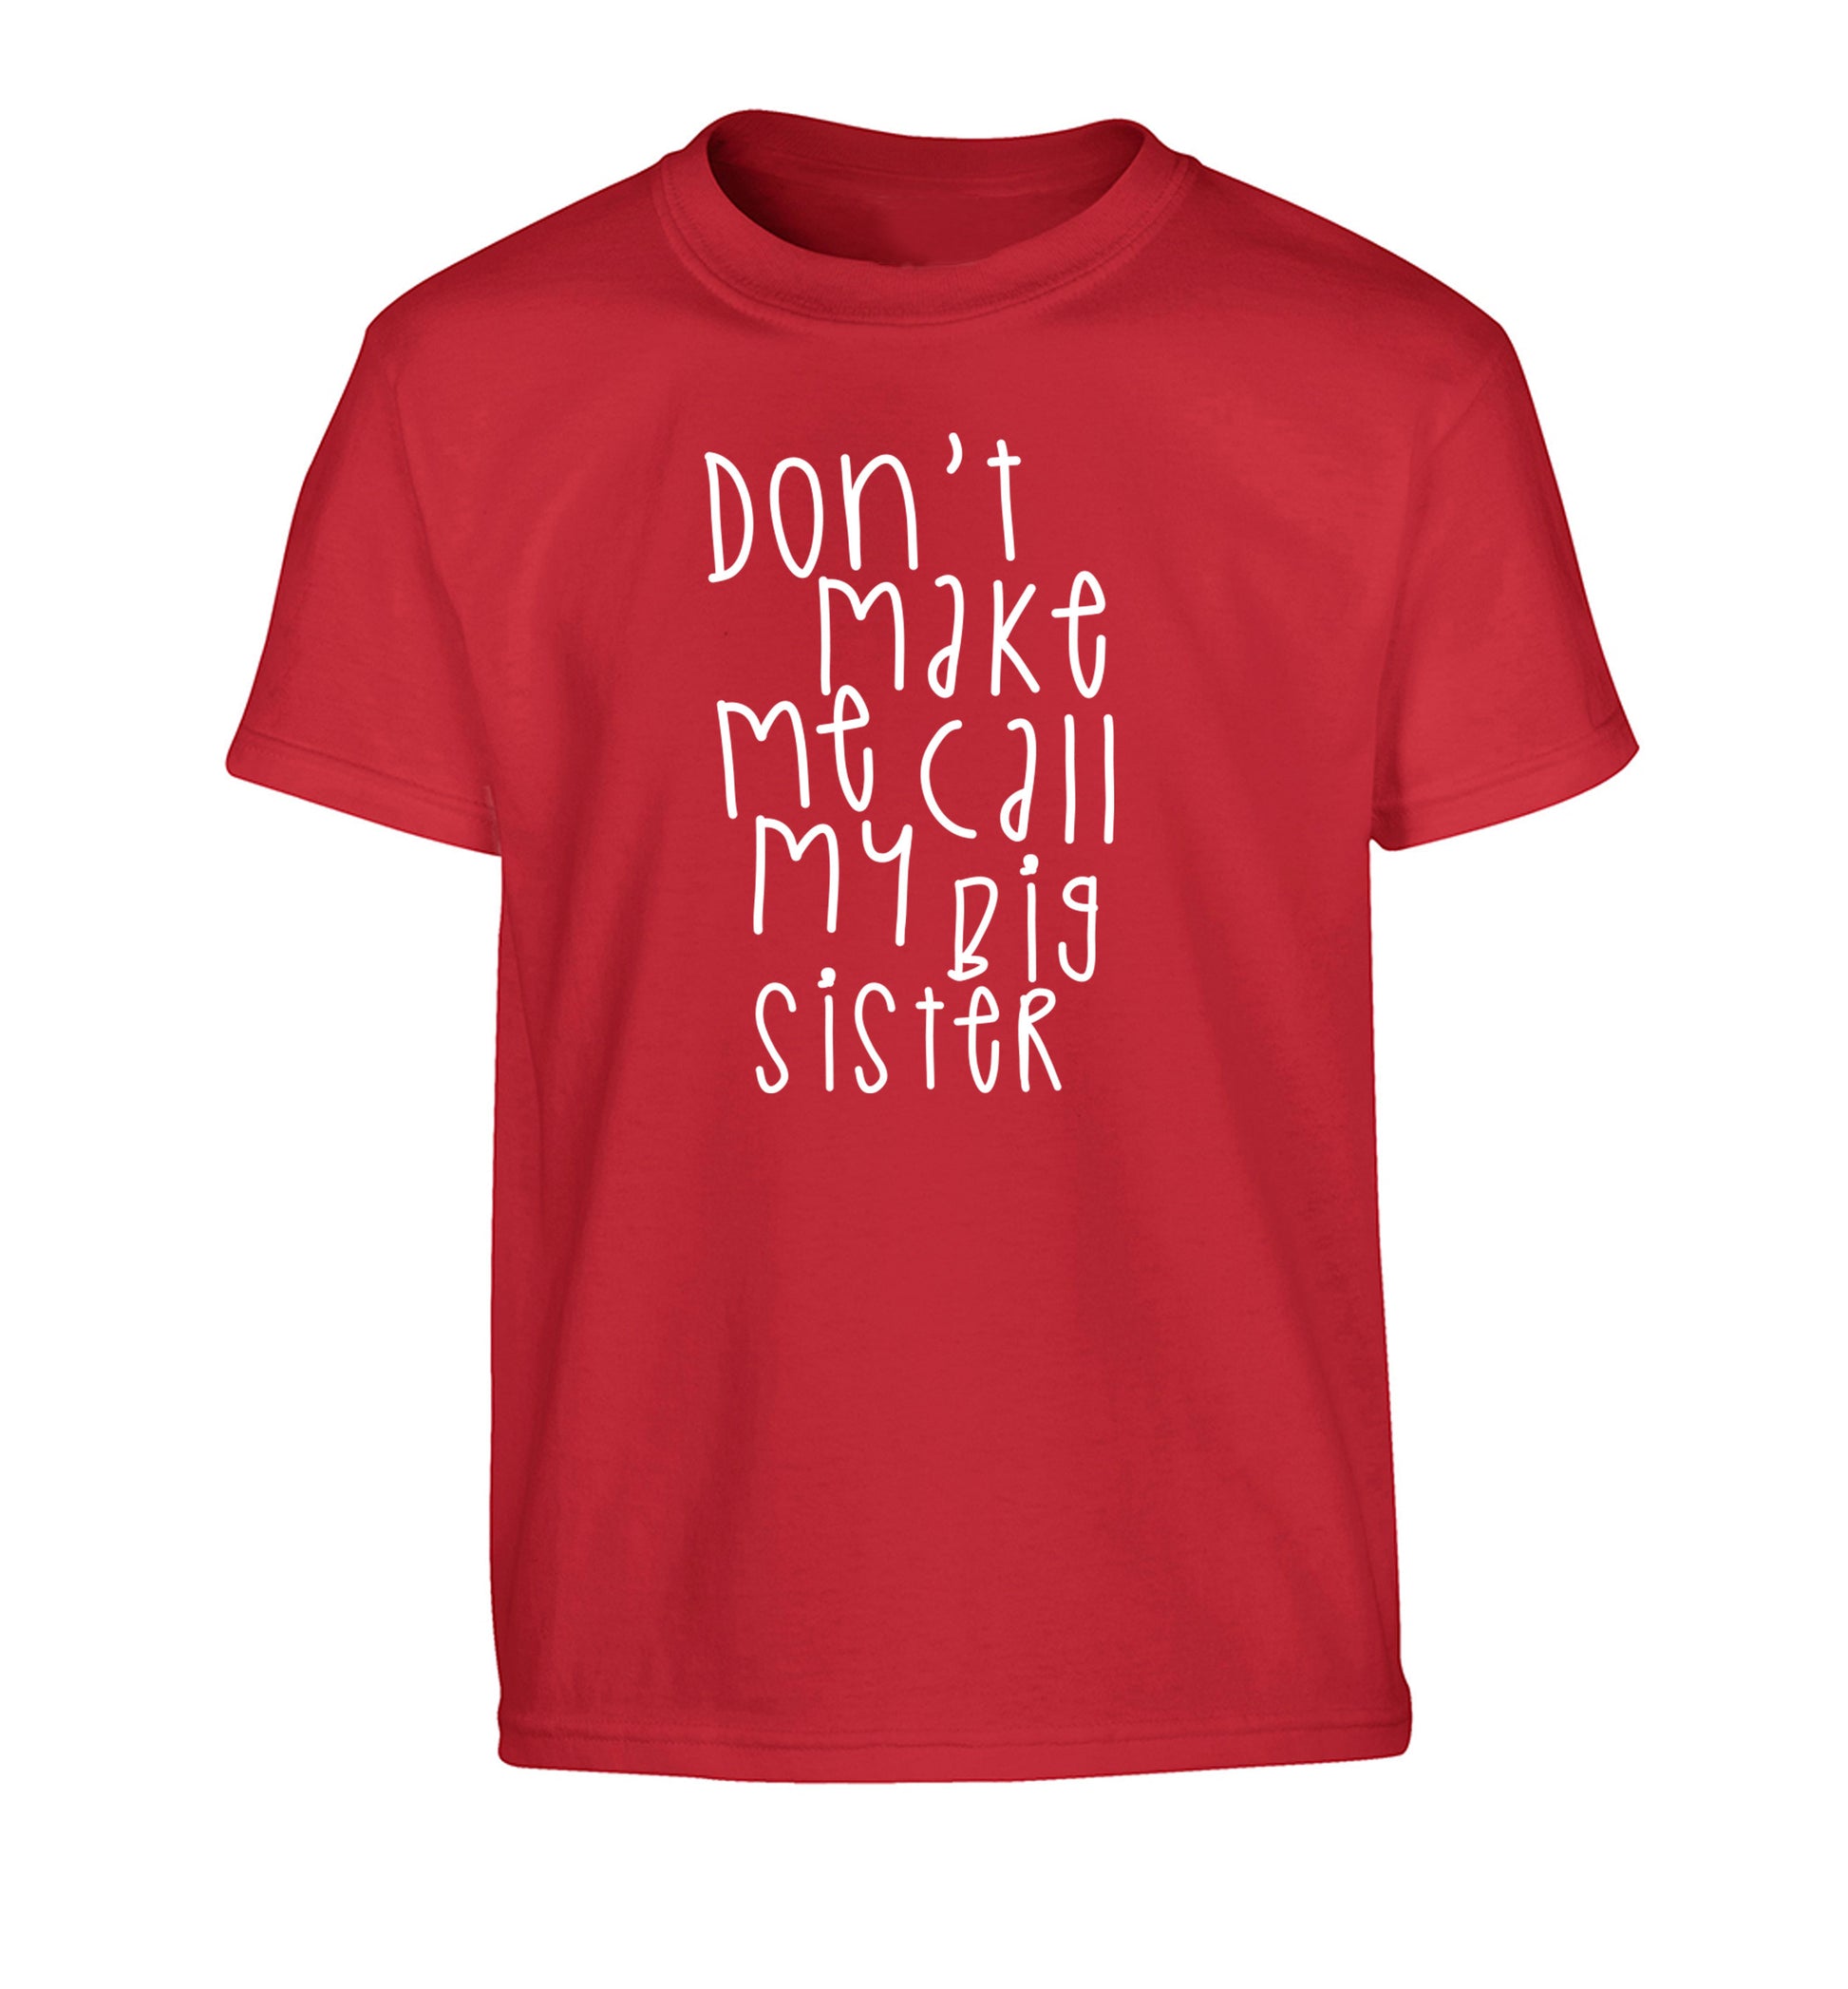 Don't make me call my big sister Children's red Tshirt 12-14 Years